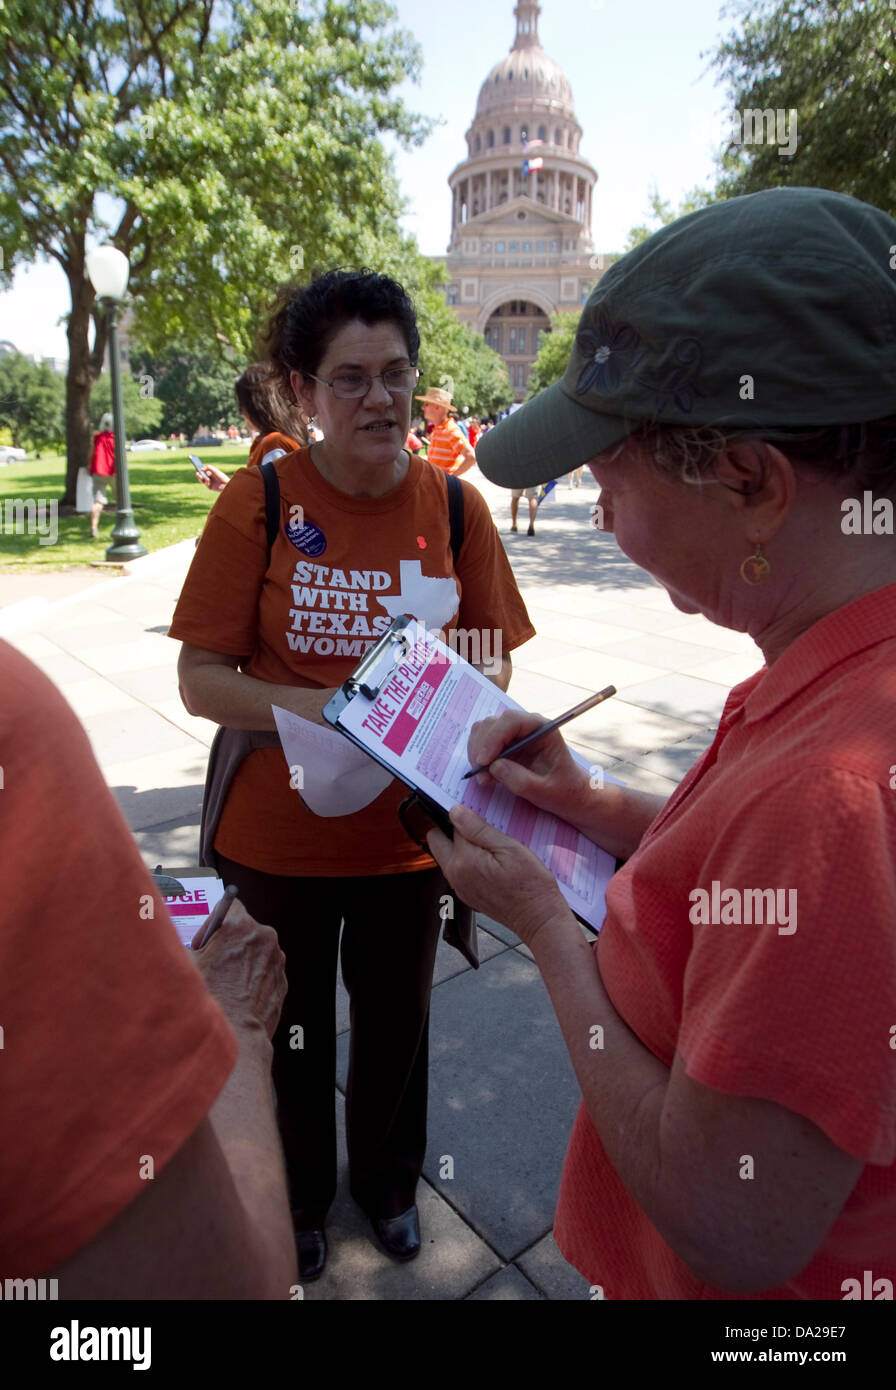 Pro-choice activists arrive at a rally at Texas Capital protesting new law relating to abortion restrictions Stock Photo